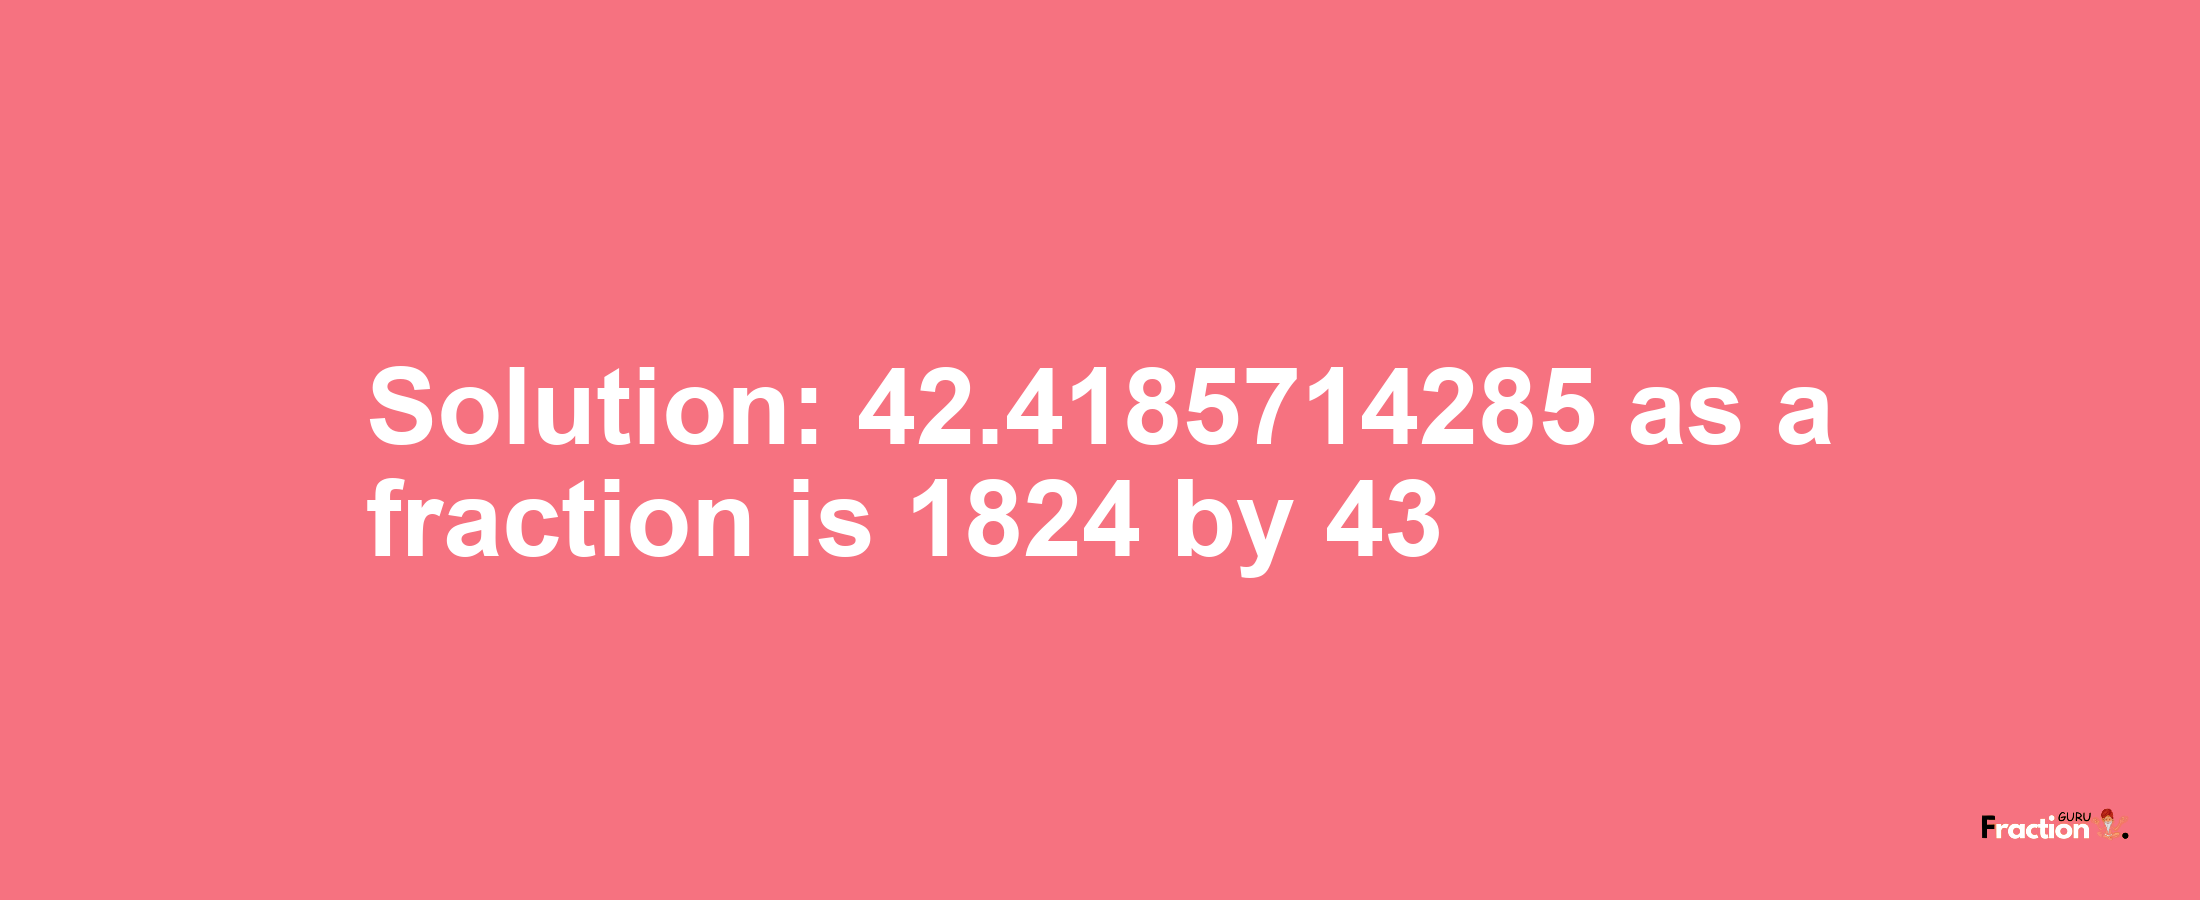 Solution:42.4185714285 as a fraction is 1824/43